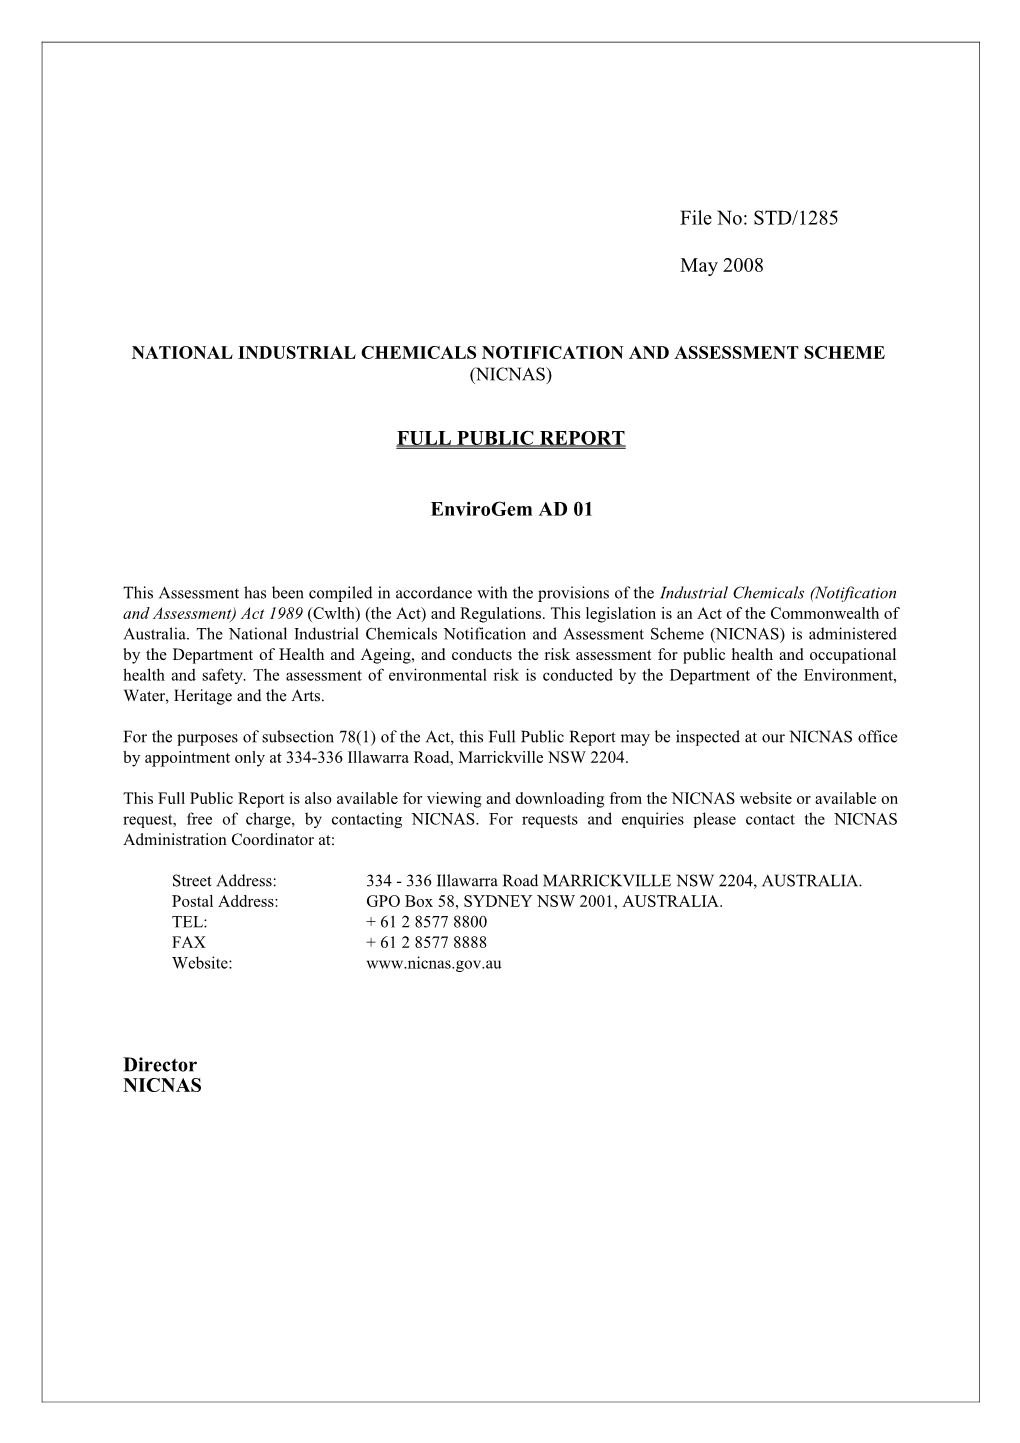 National Industrial Chemicals Notification and Assessment Scheme s15